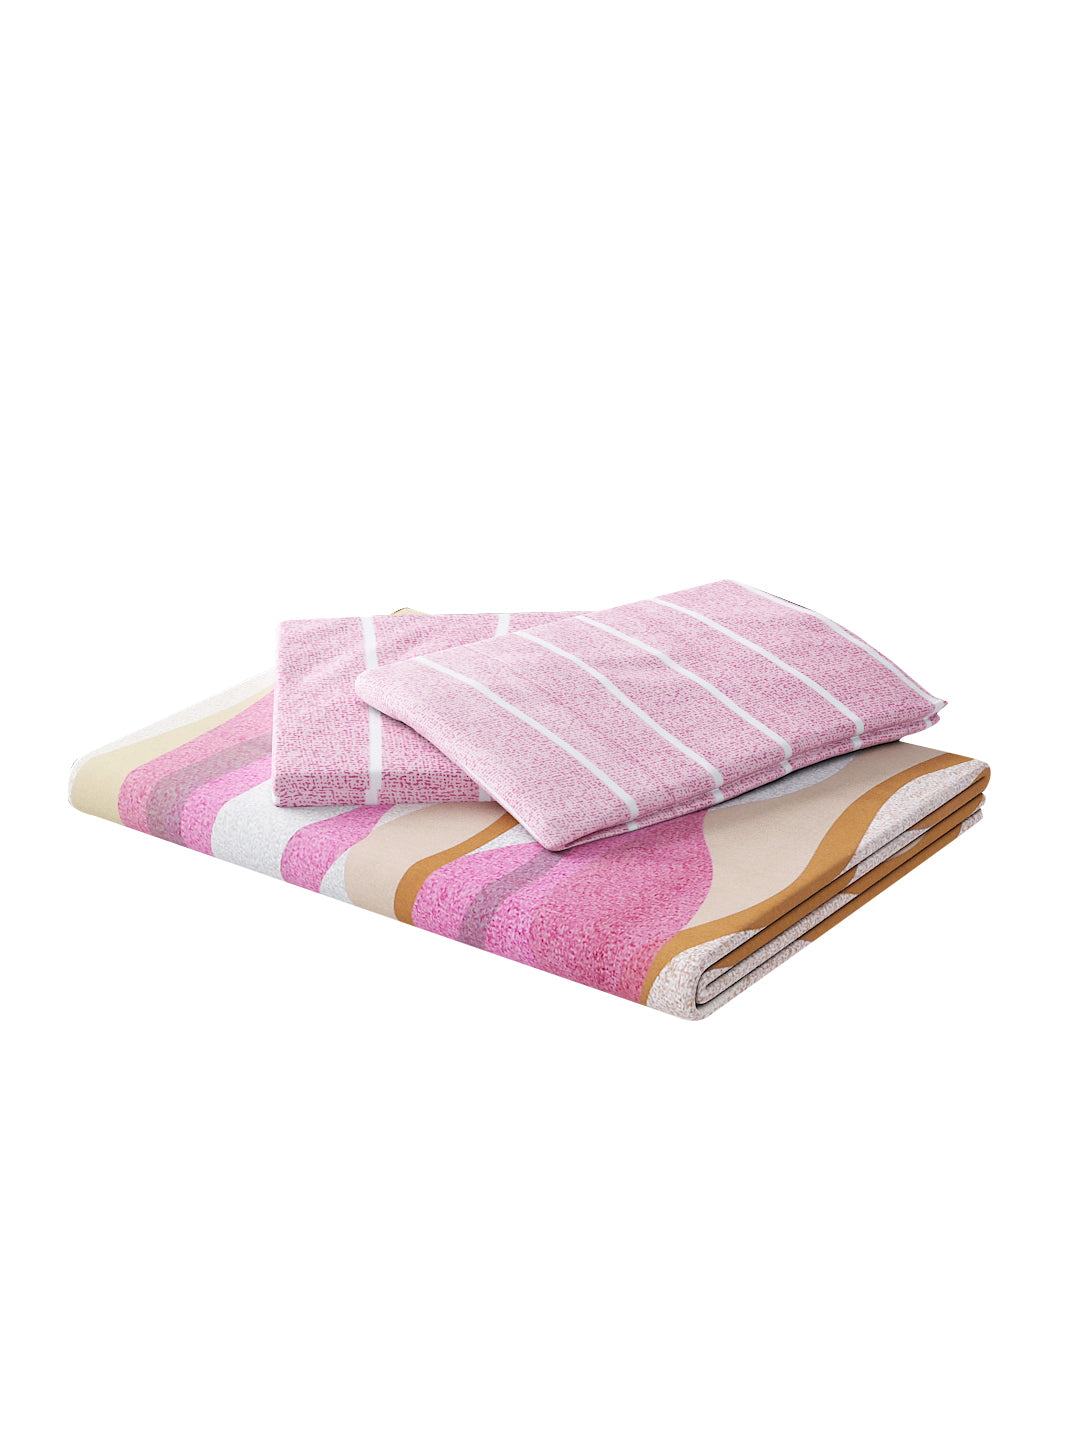 144 TC Cotton Double Bed Bedsheet With 2 Pillow Covers-Multicolor Pink